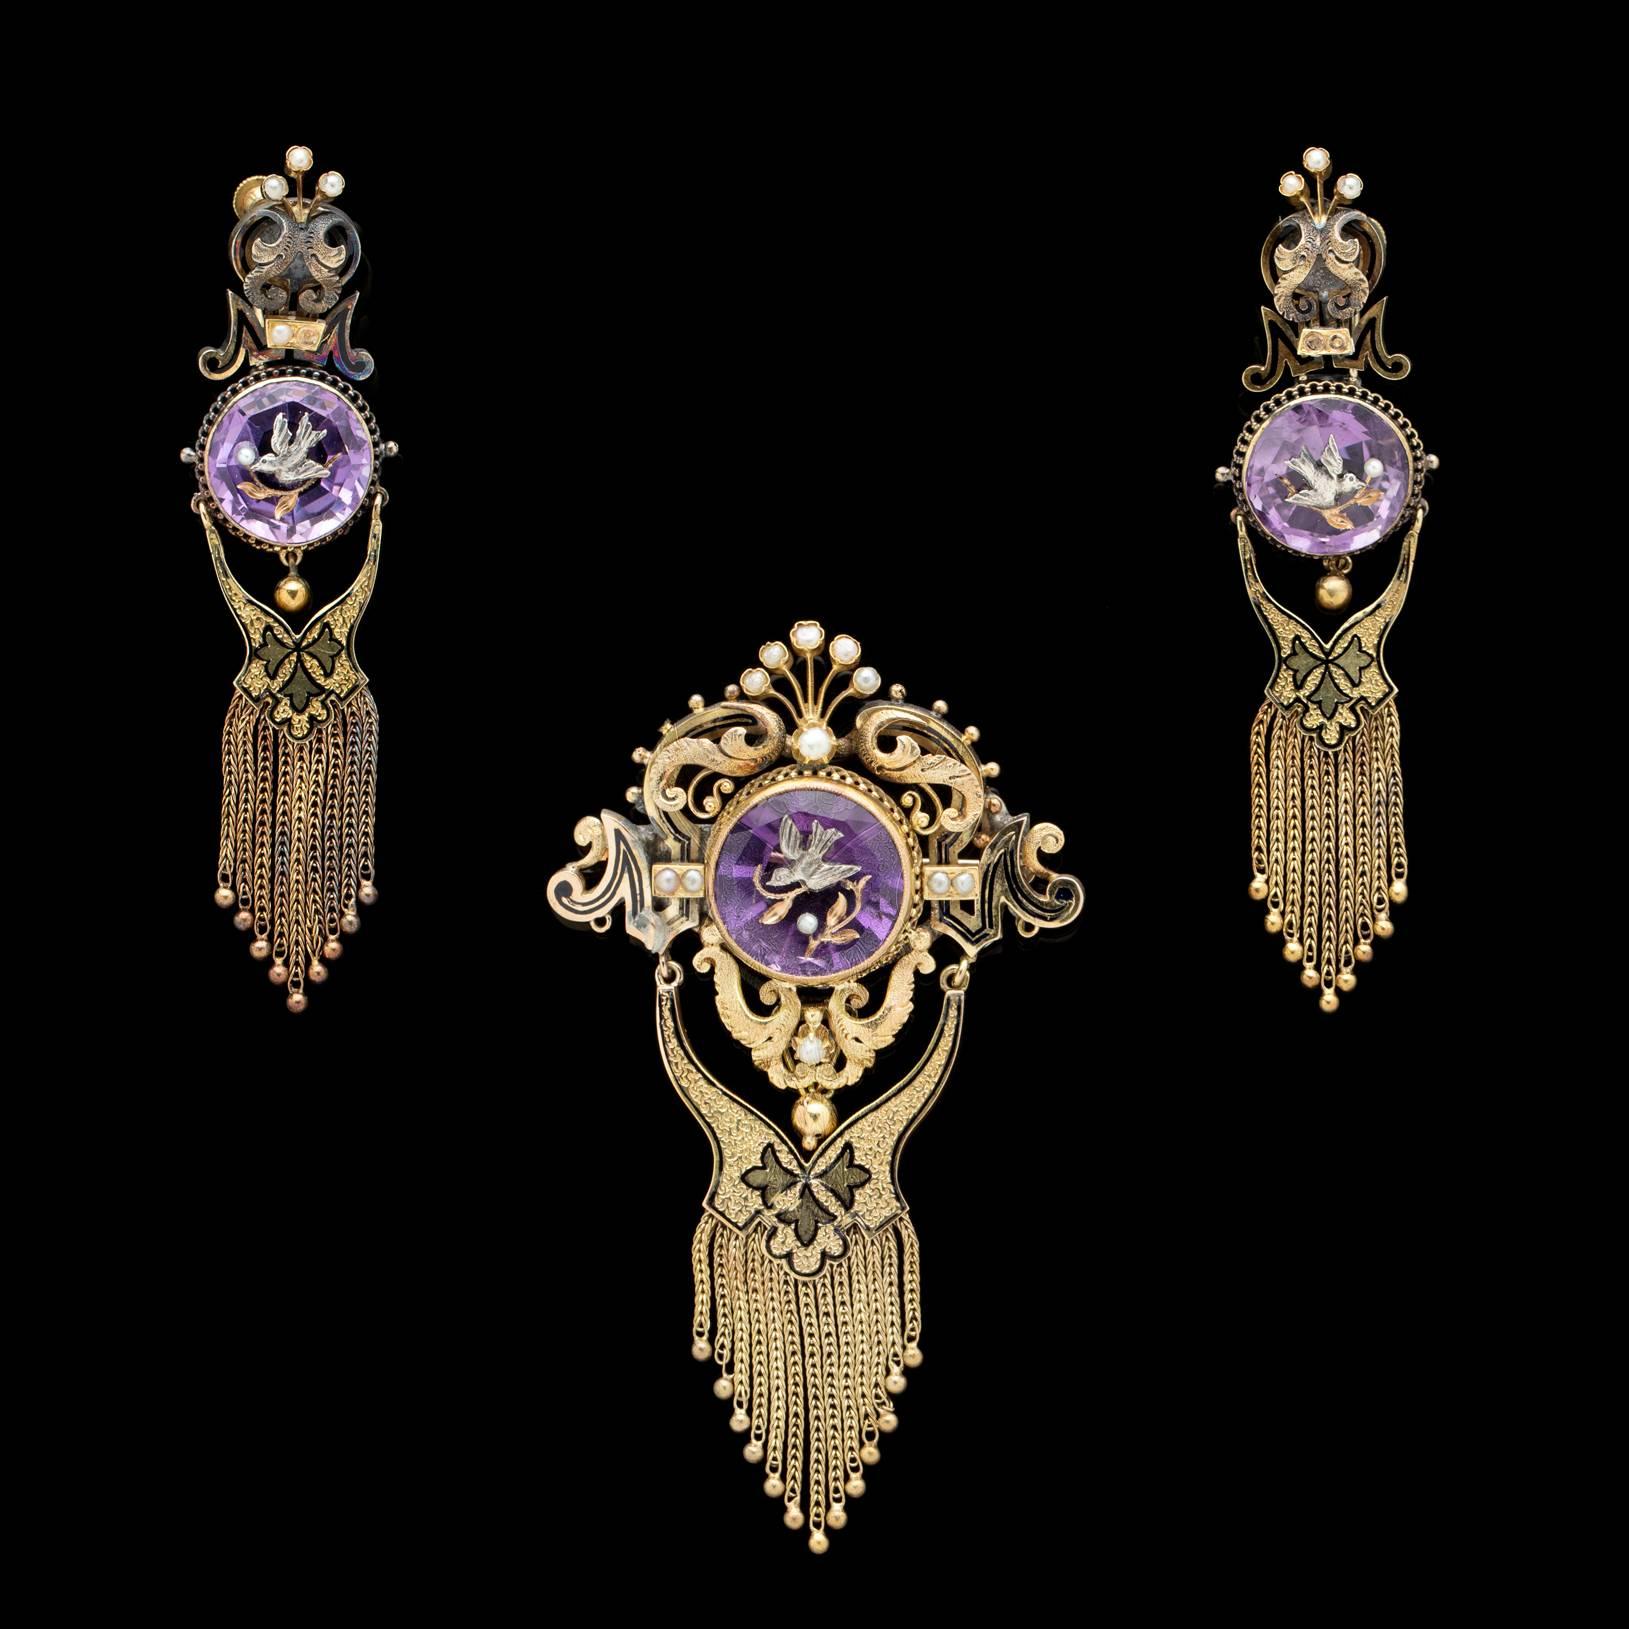 Own a piece of history. A unique 14k gold brooch and earring set circa 1870's featuring rich purple amethyst intaglios inlaid with doves and olive branches, representing hope and forgiveness. Accented with seed pearls, enamel tracery and fringe, the